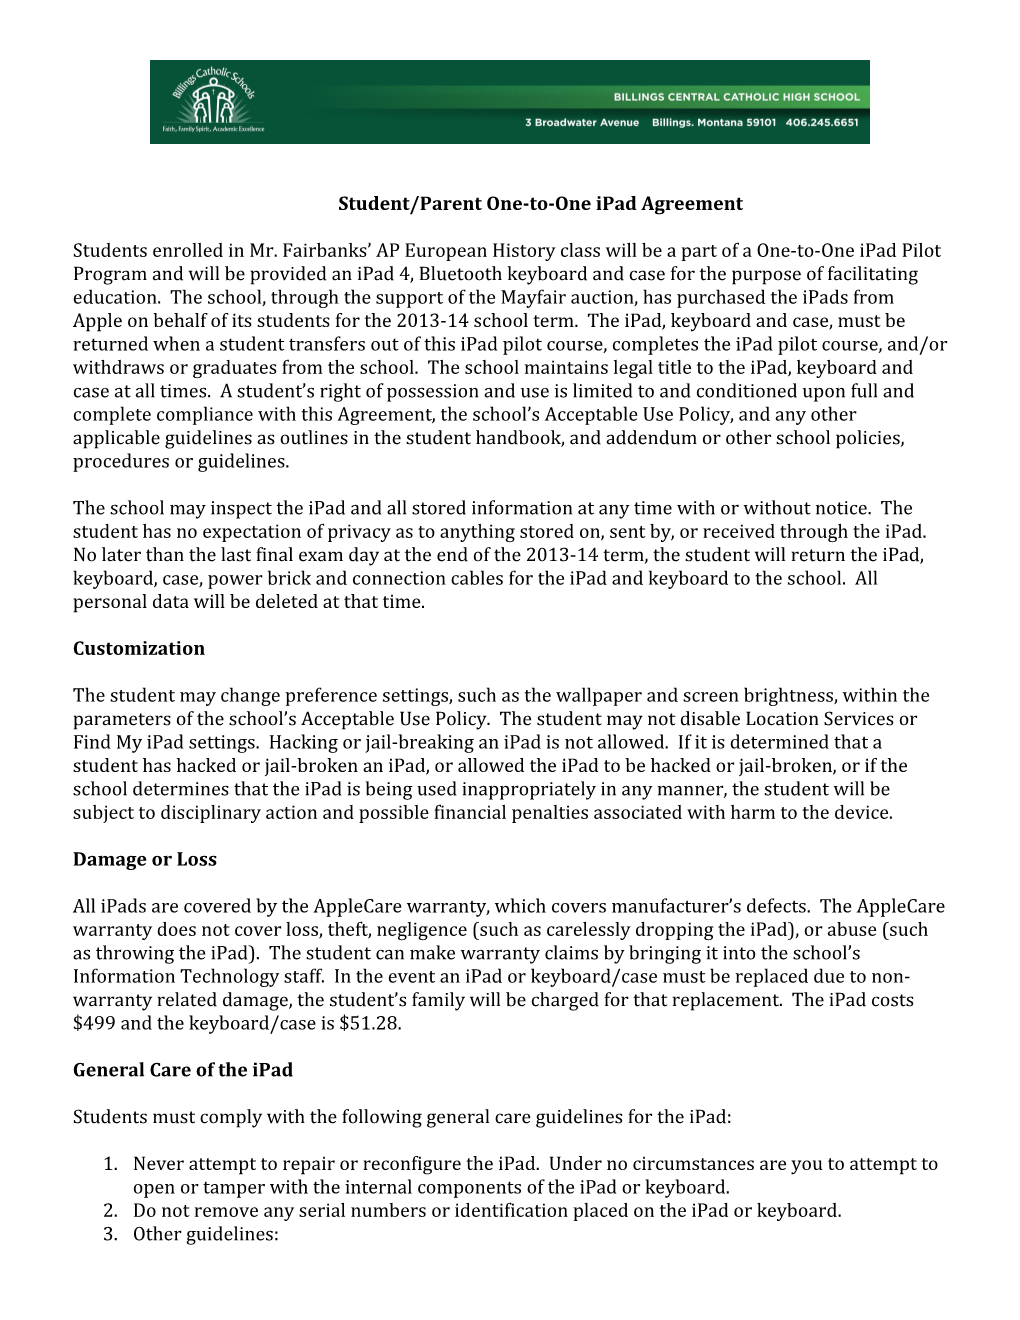 Student/Parent One-To-One Ipad Agreement